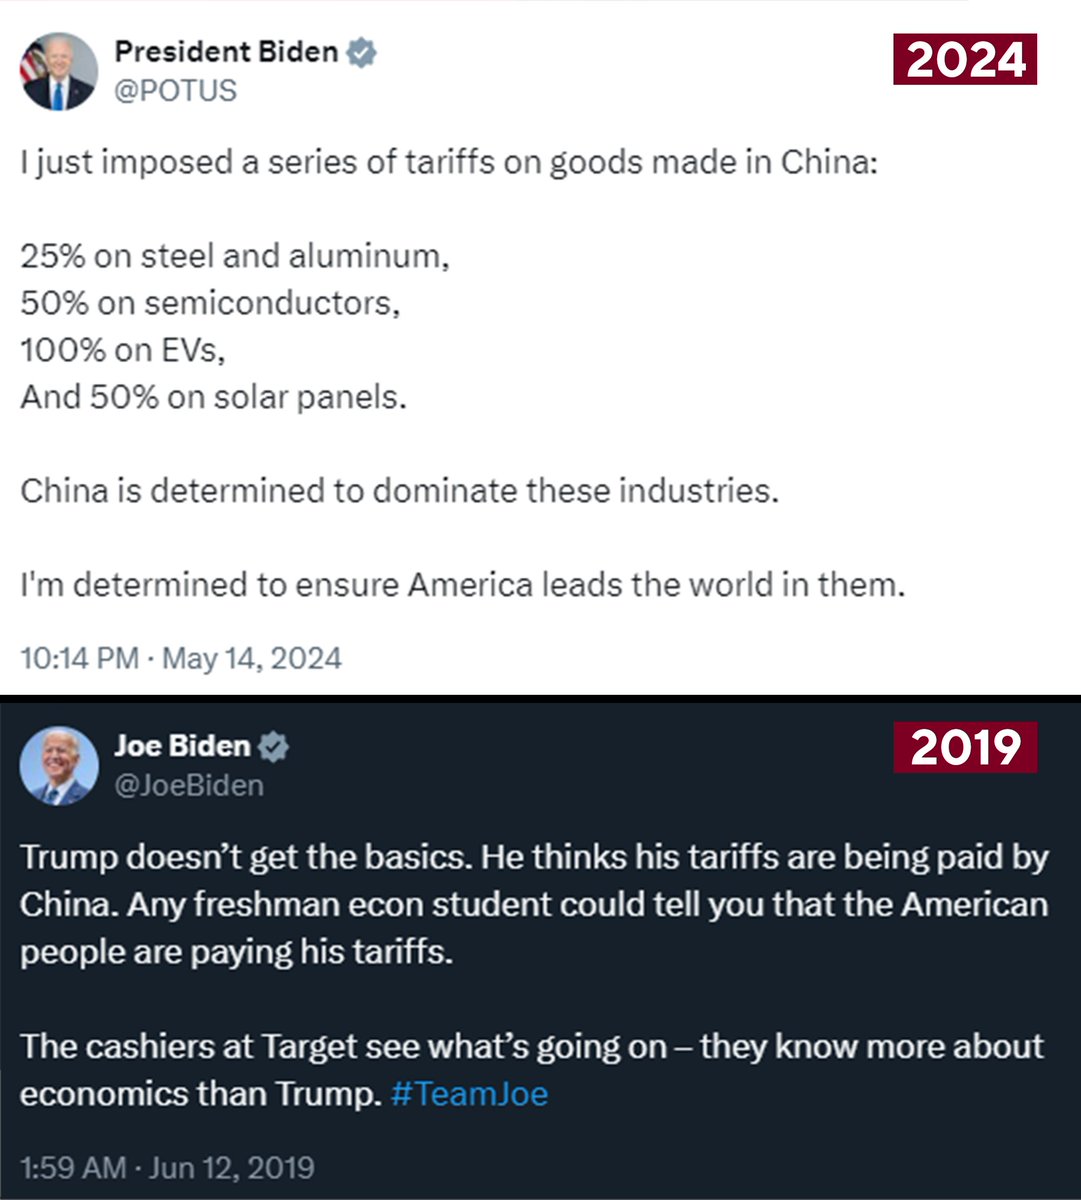 A lesson on tariffs from 2019